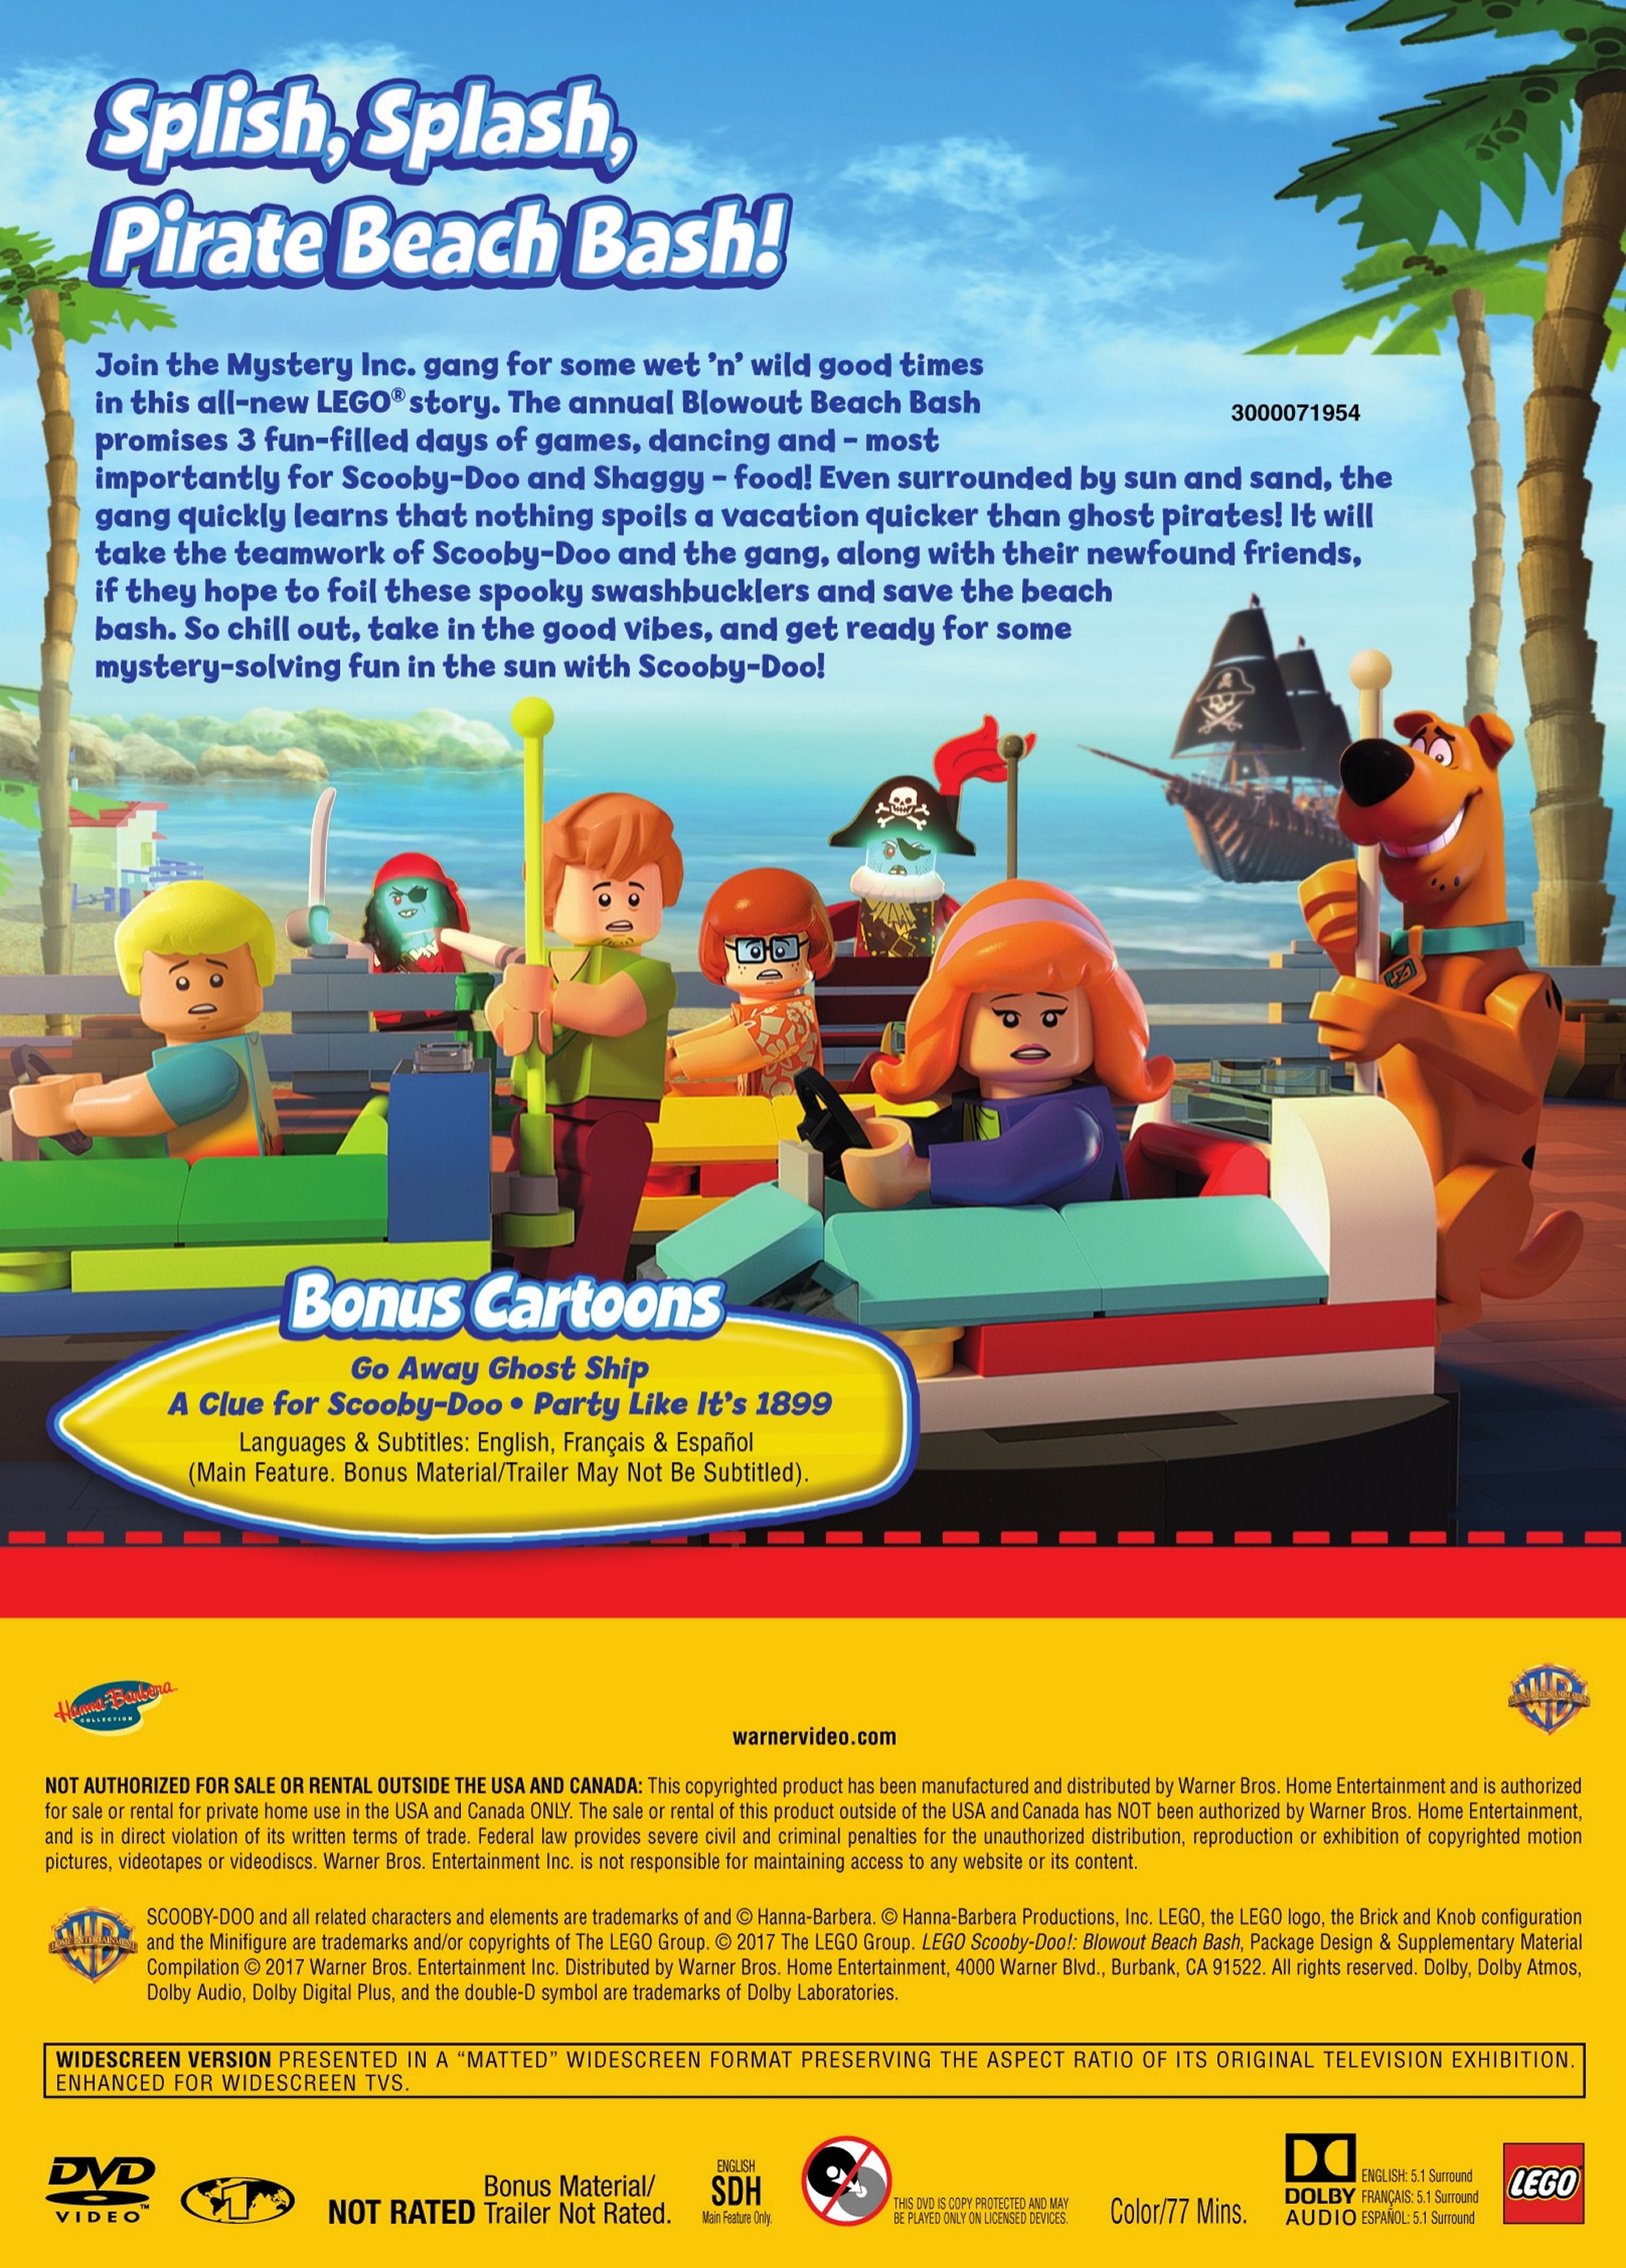 LEGO Scooby-Doo! Blowout Beach Bash (DVD) - image 2 of 2